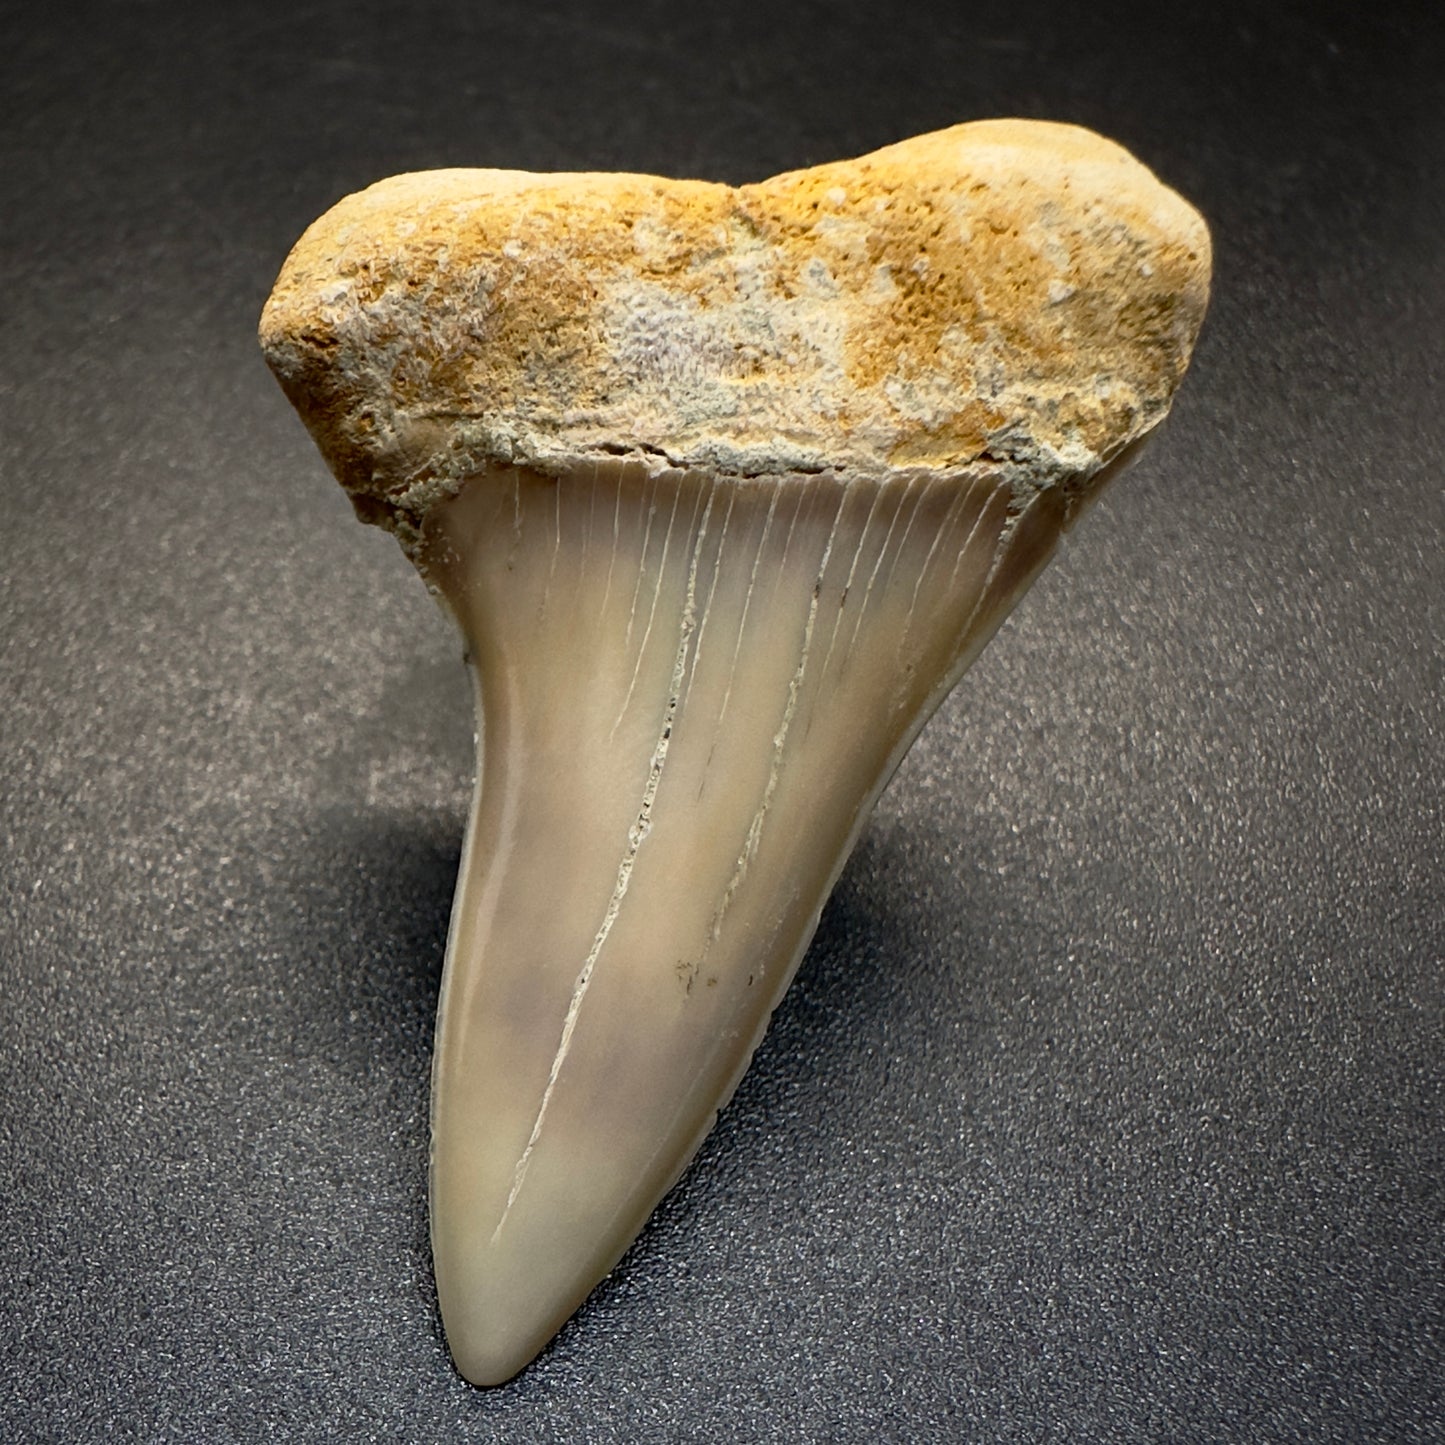 1.86 inches colorful Extinct Hooked-Tooth Mako - Isurus planus shark tooth from Bakersfield, California M503 front down